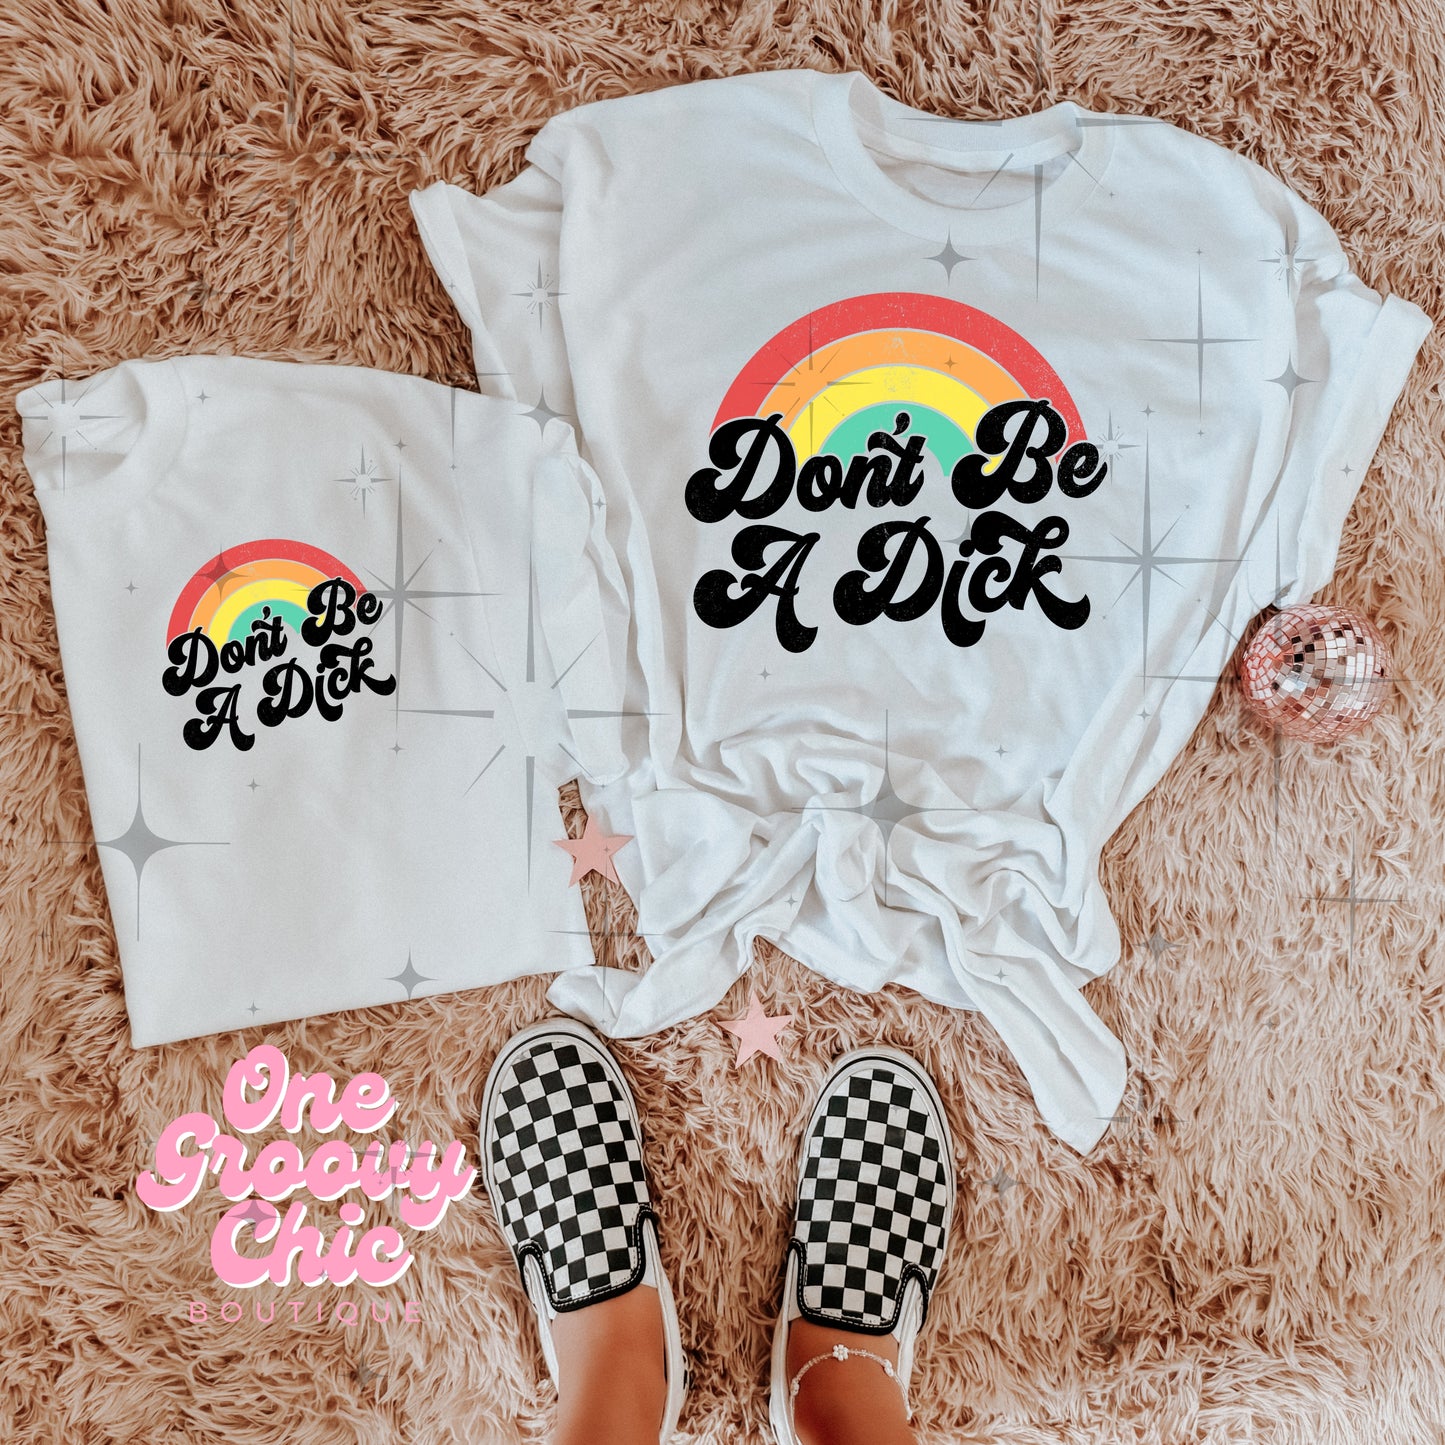 Don't Be A Dick Tee